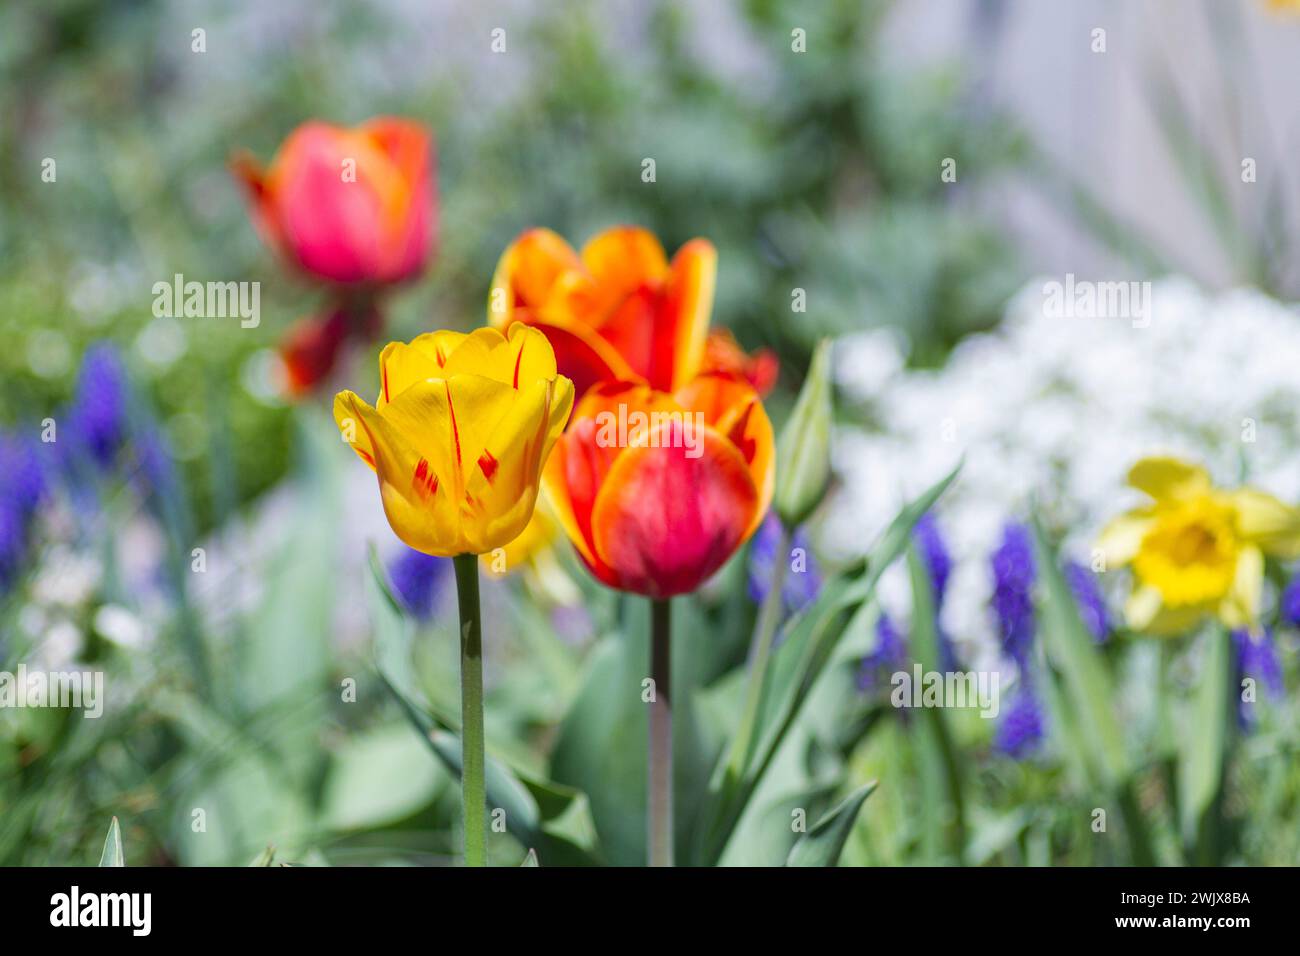 Colorful tulip flowers blooming in the garden, floral background, stock photo, yellow and red tulips, spring flower bed Stock Photo